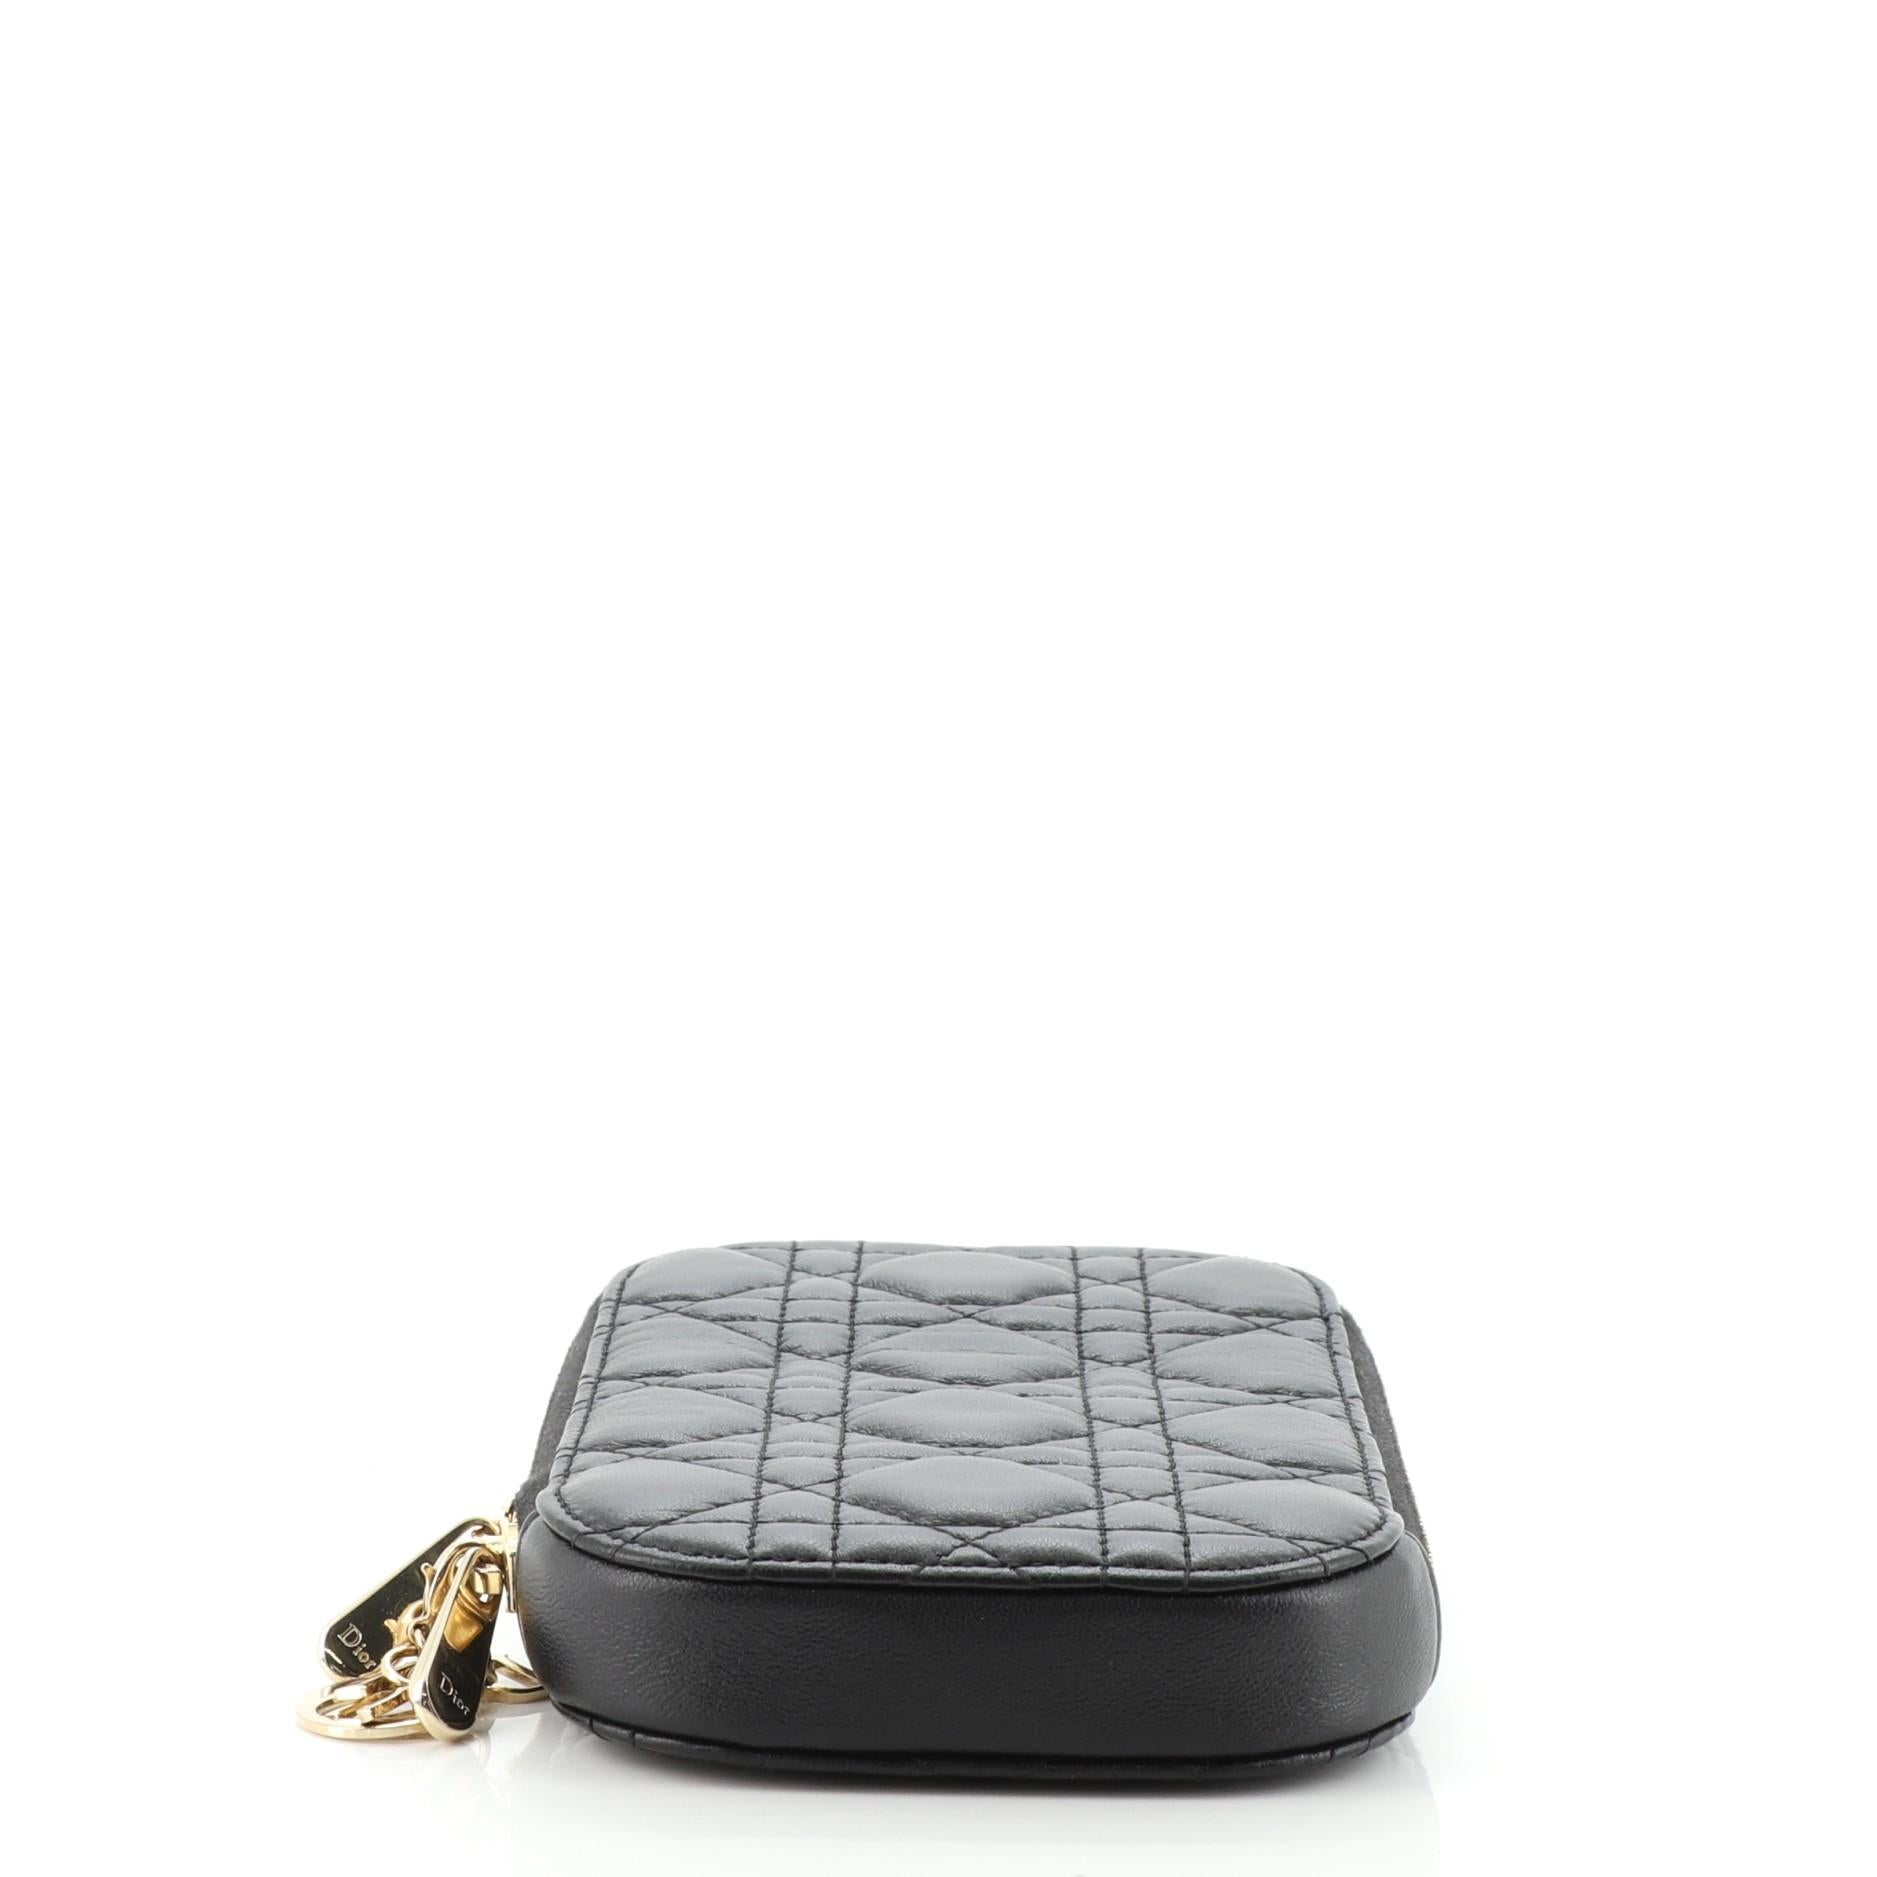 lady dior phone pouch